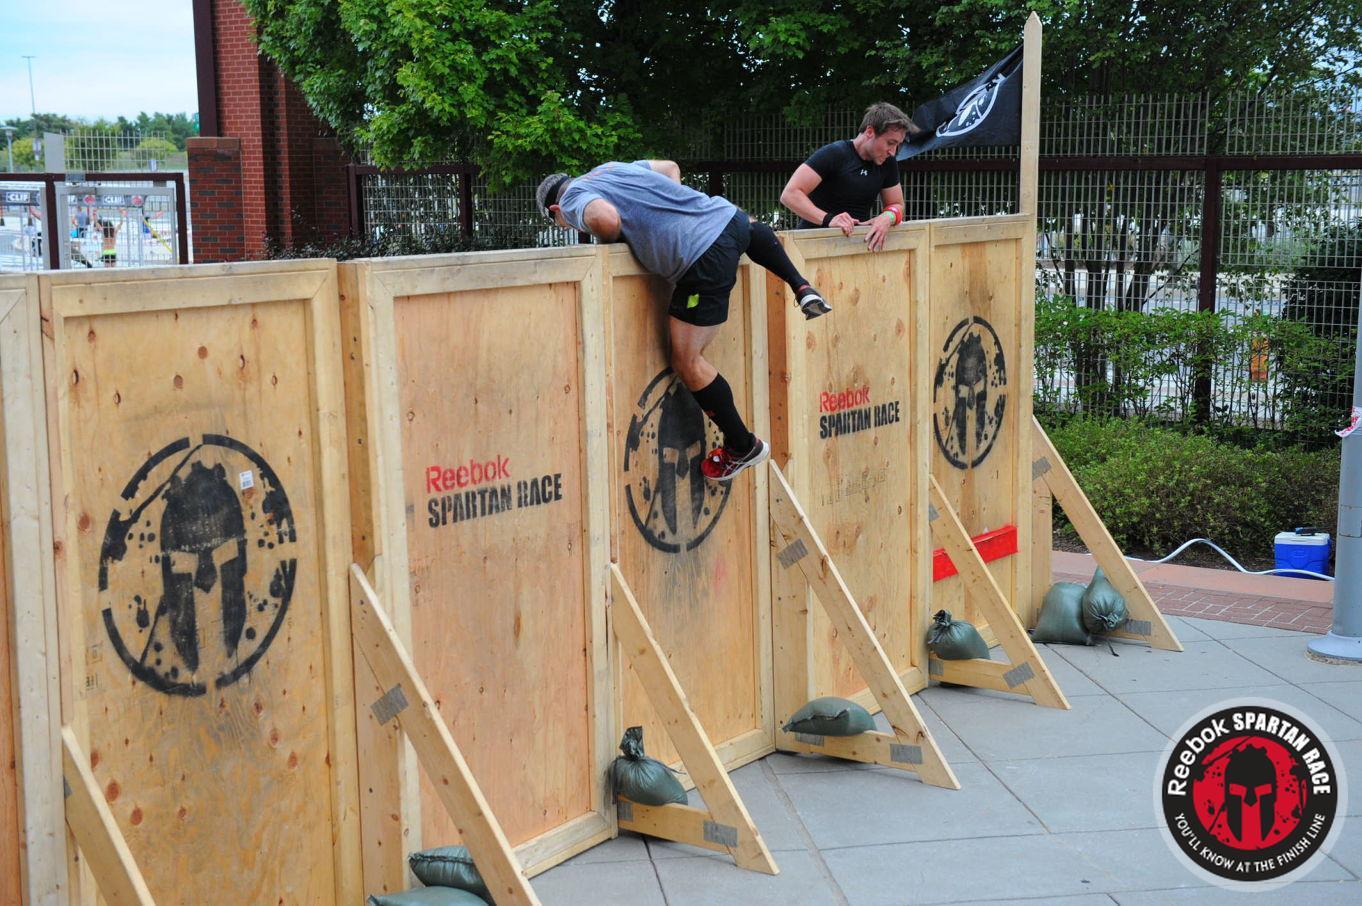 What Kind Of Obstacles Are In The Spartan Race